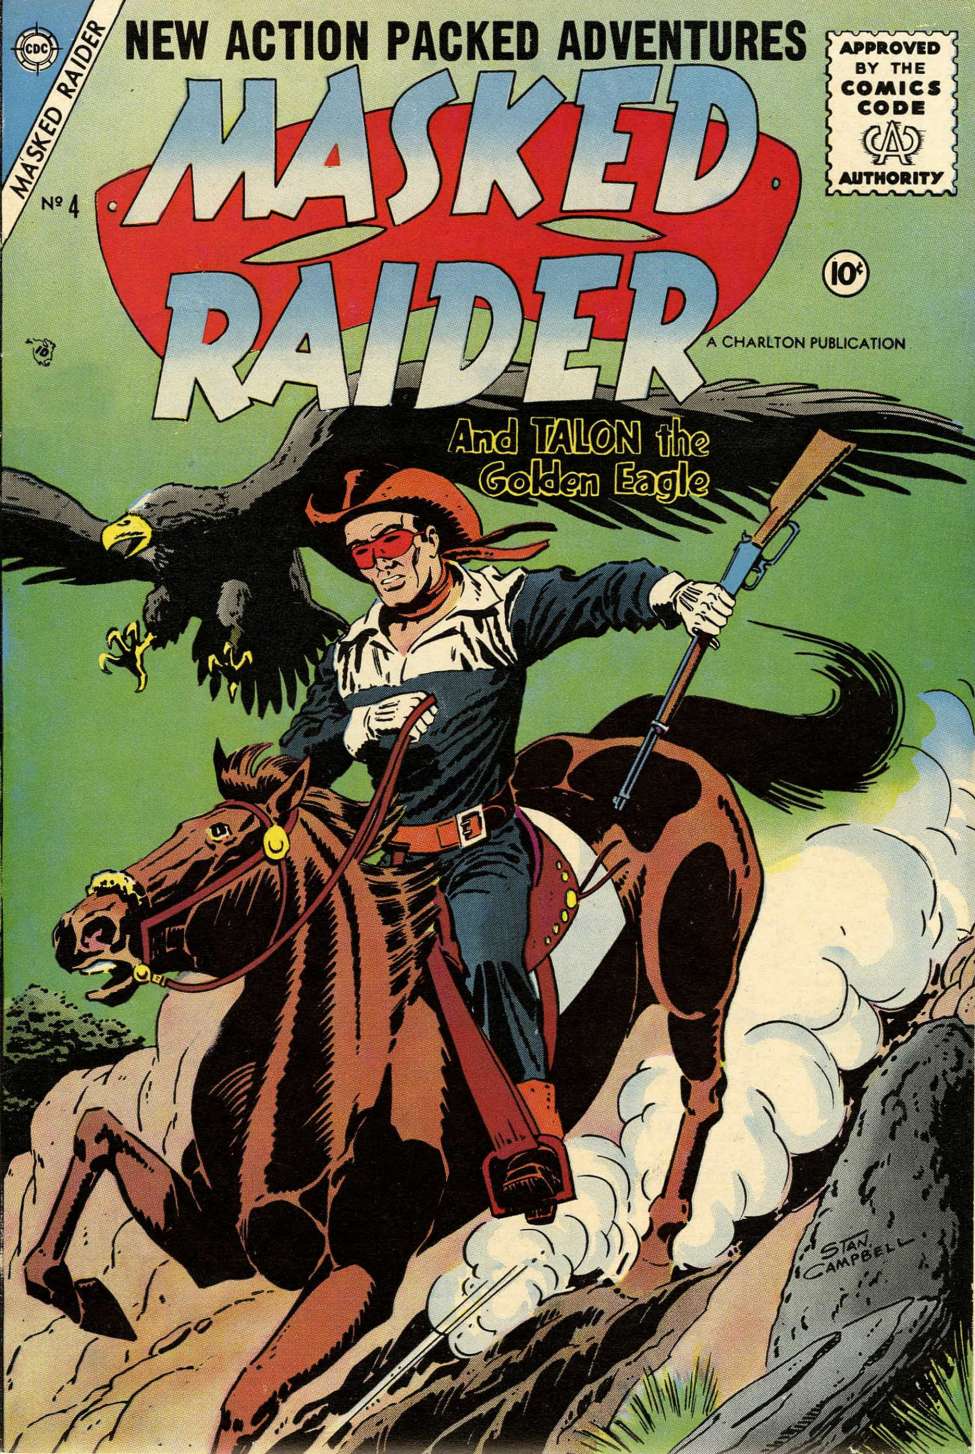 Book Cover For Masked Raider 4 - Version 1